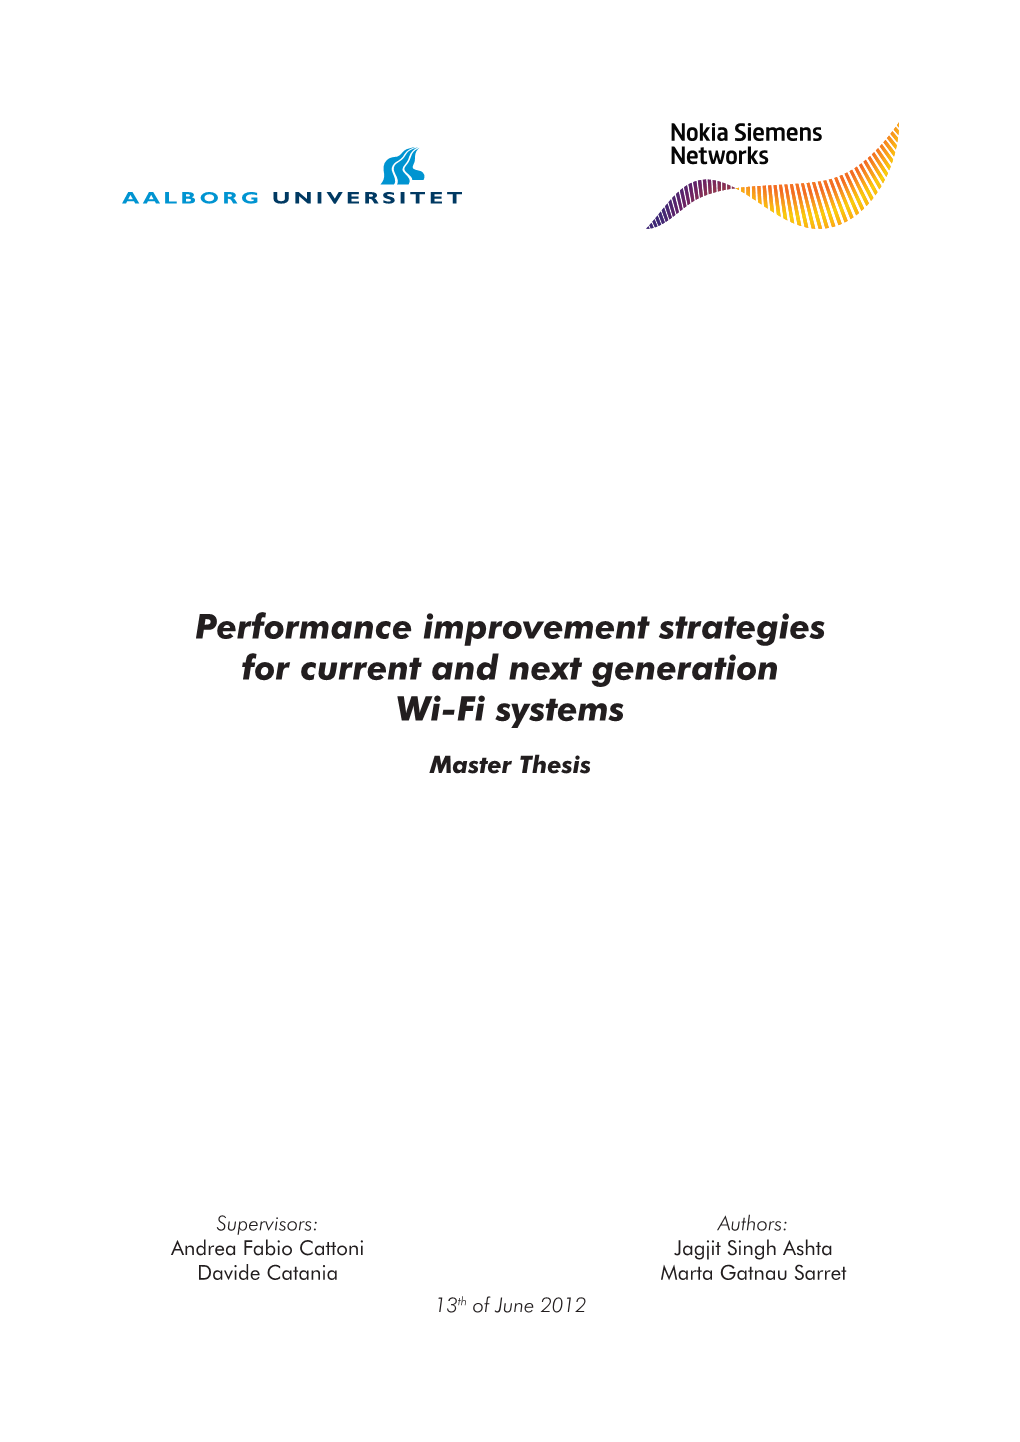 Performance Improvement Strategies for Current and Next Generation Wi-Fi Systems